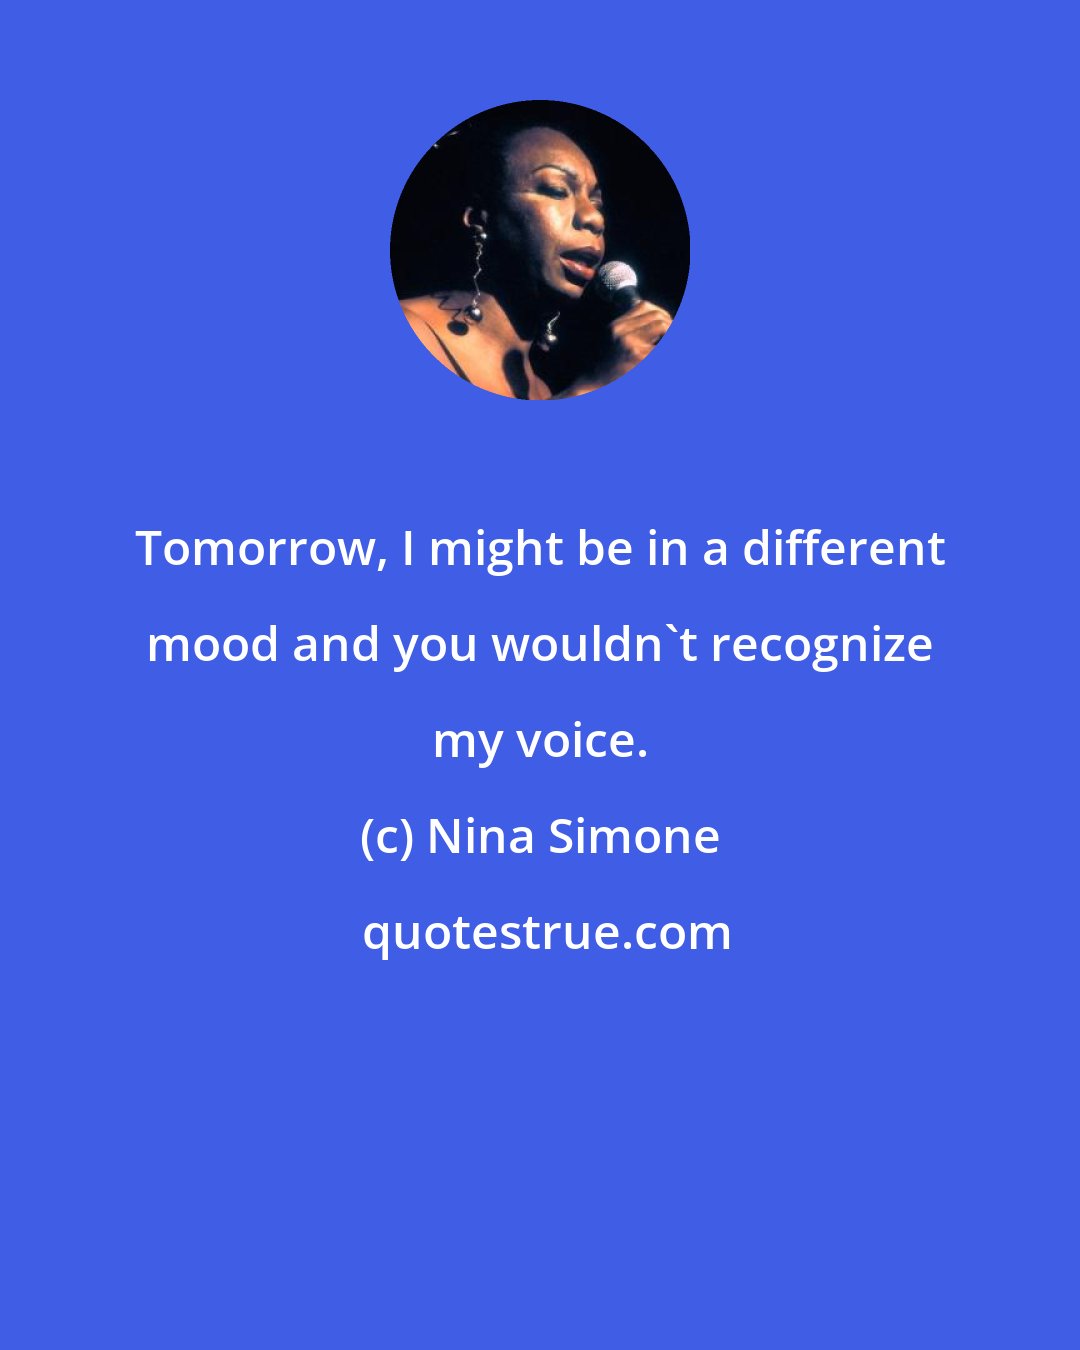 Nina Simone: Tomorrow, I might be in a different mood and you wouldn't recognize my voice.